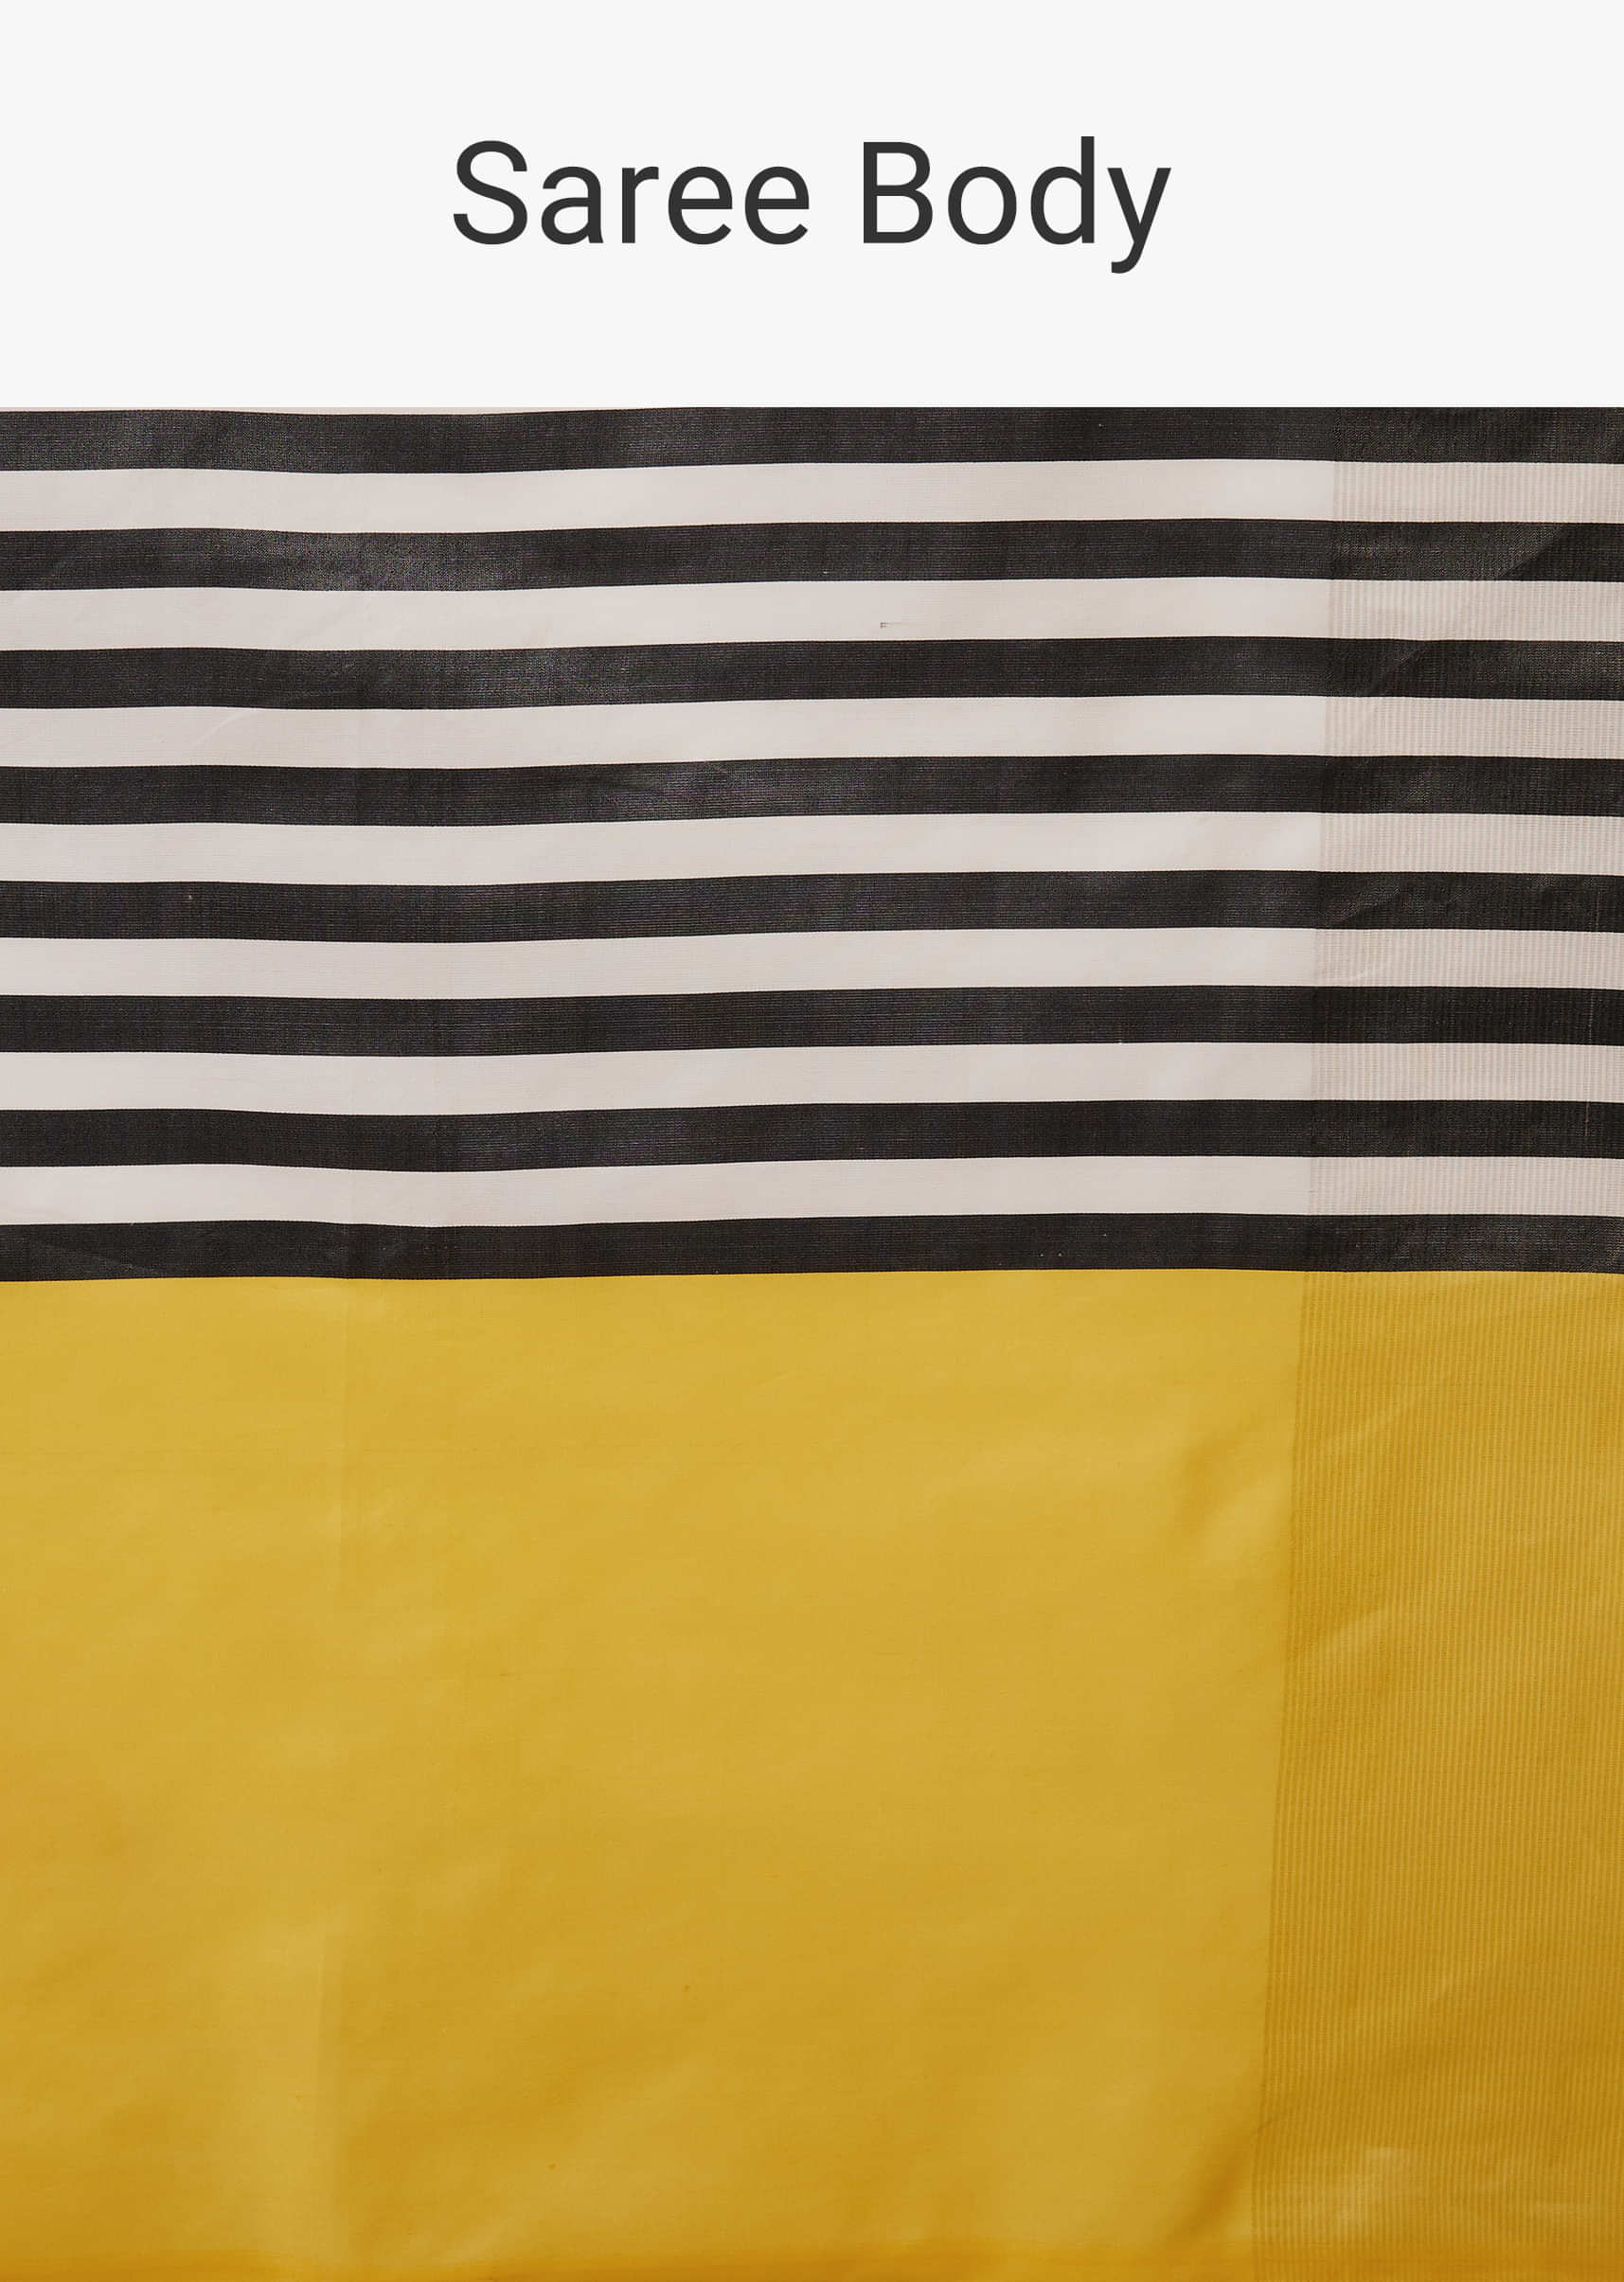 Bright Yellow Satin Printed Saree With Black And White Stripes